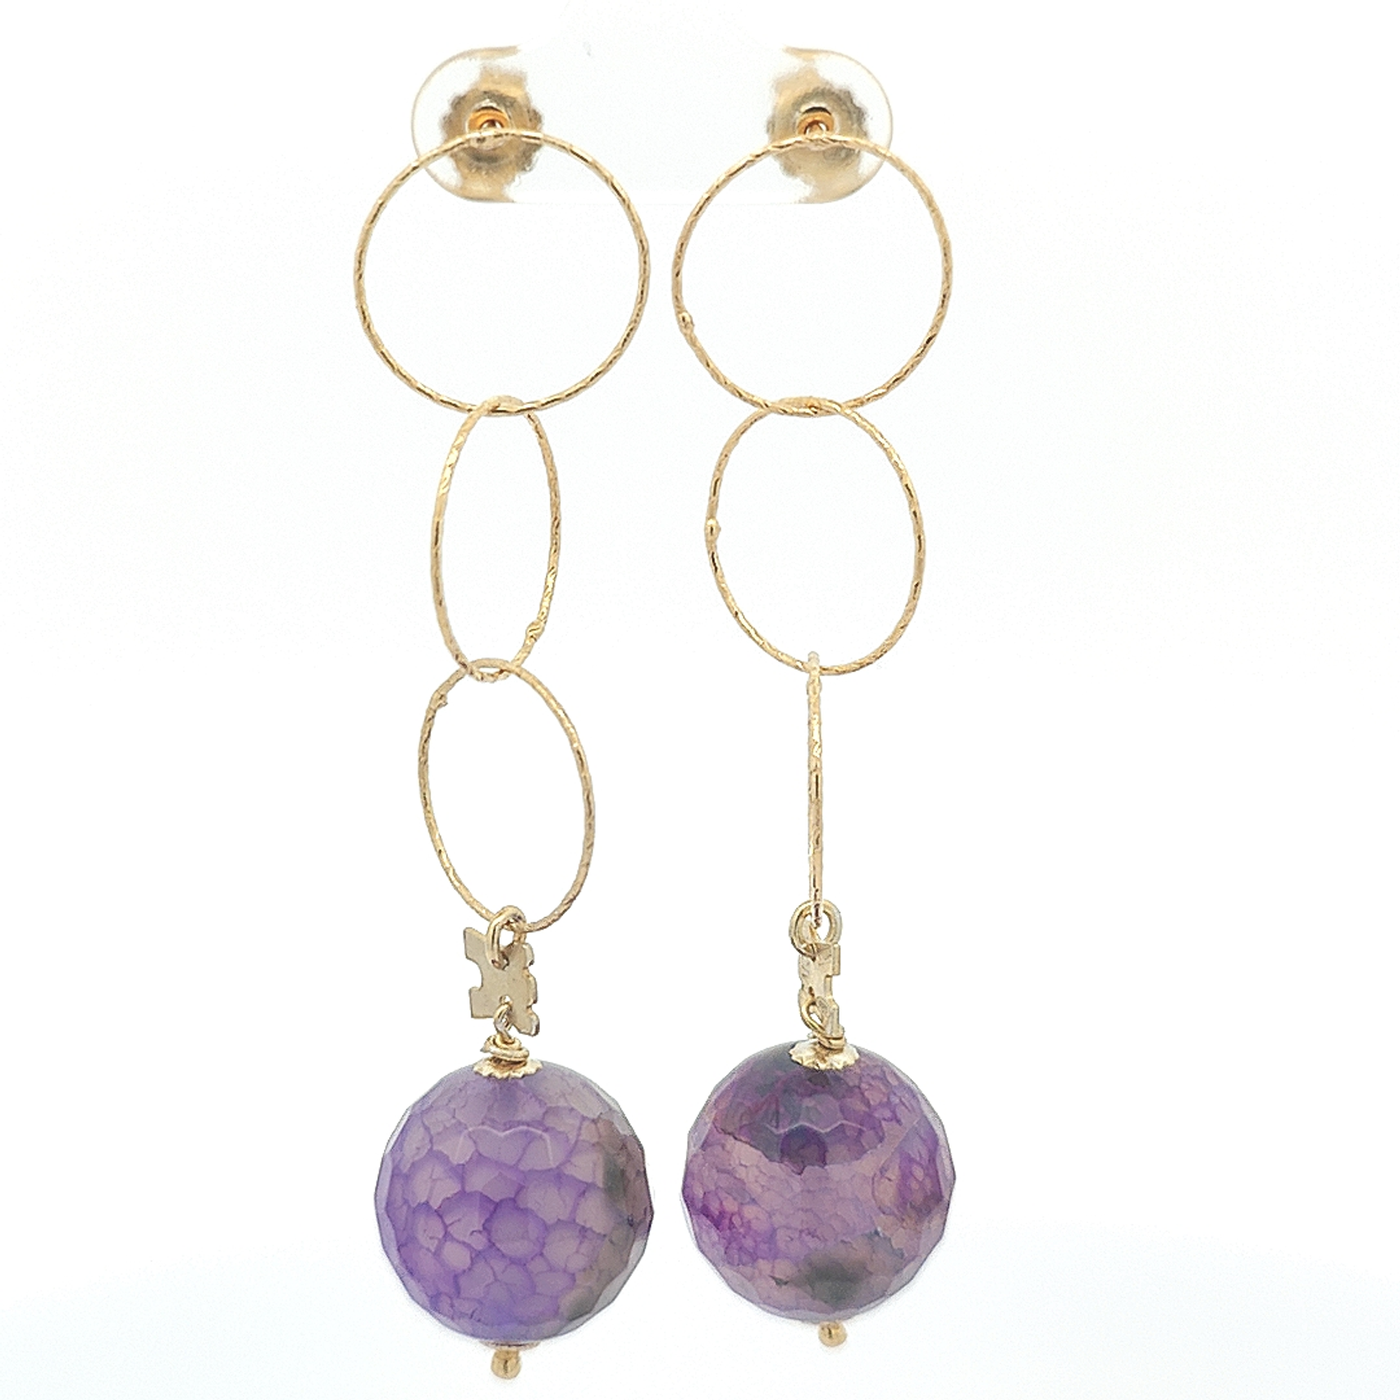 Black and Violet Agate Earrings - April - boothandbooth